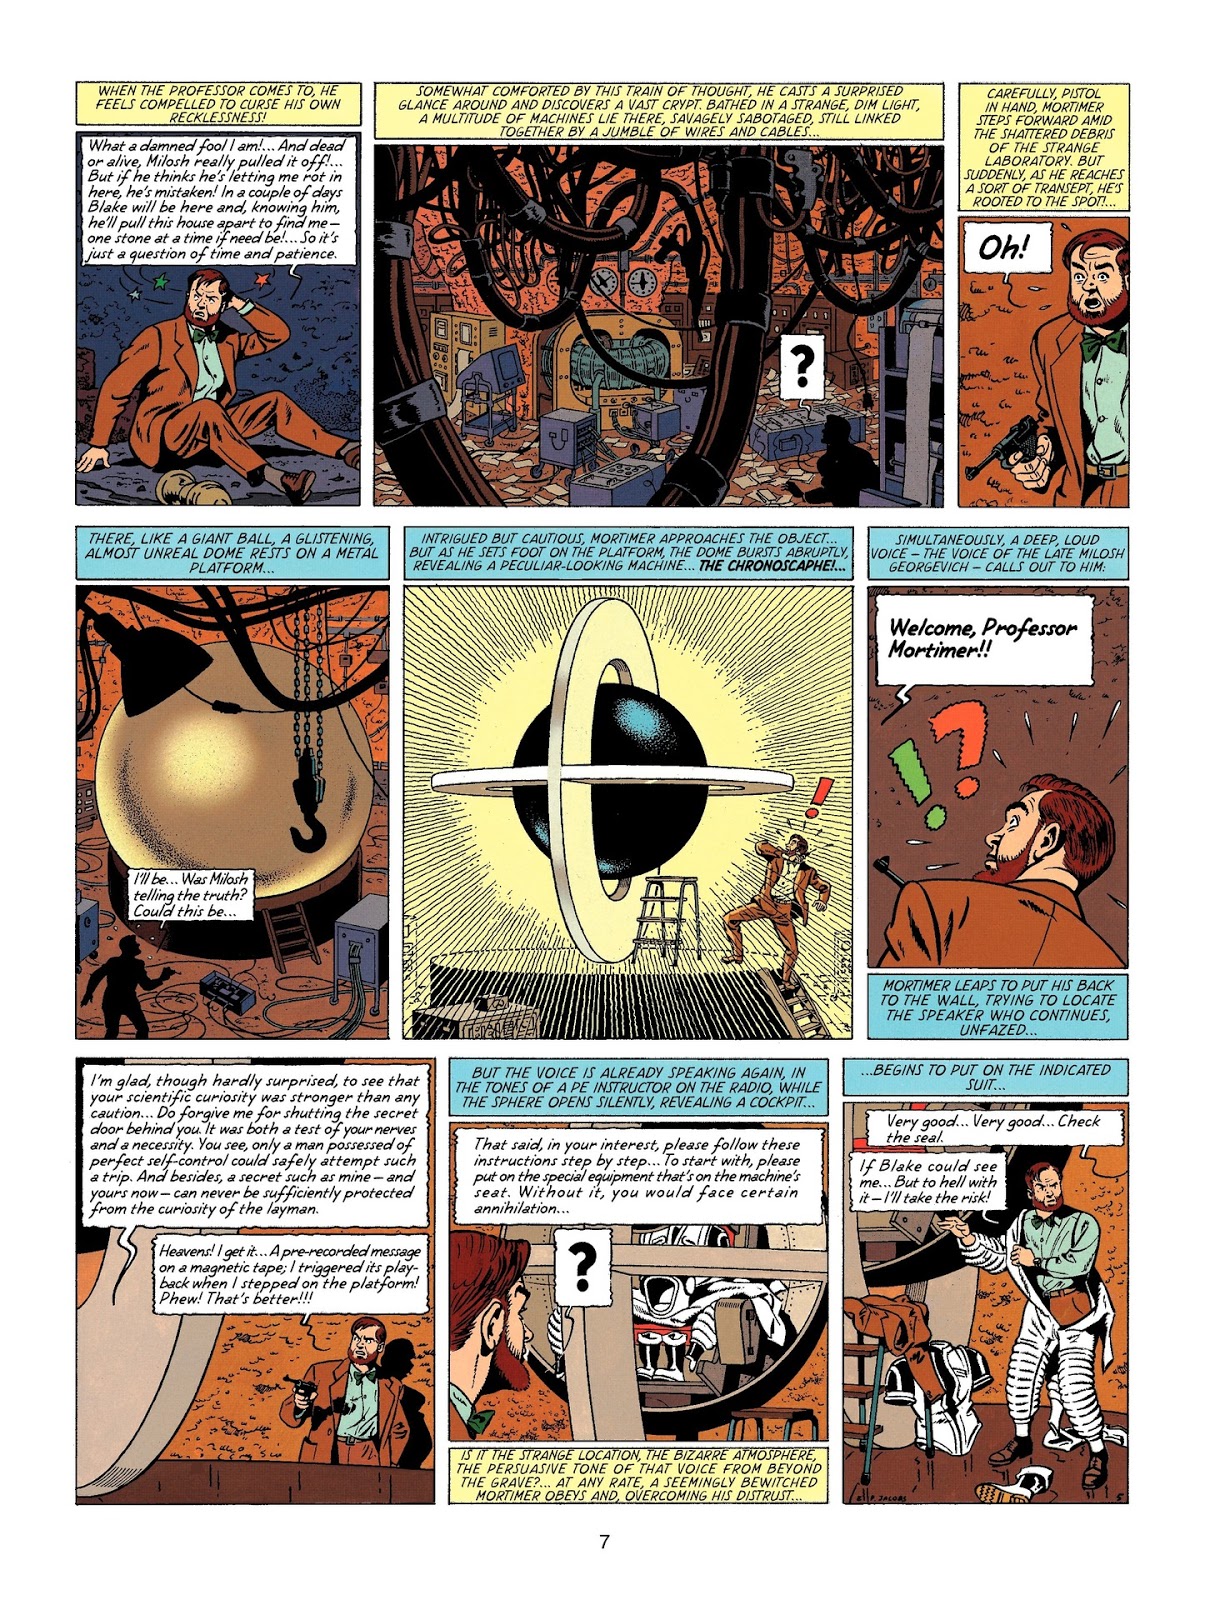 Blake and Mortimer The Time Trap review